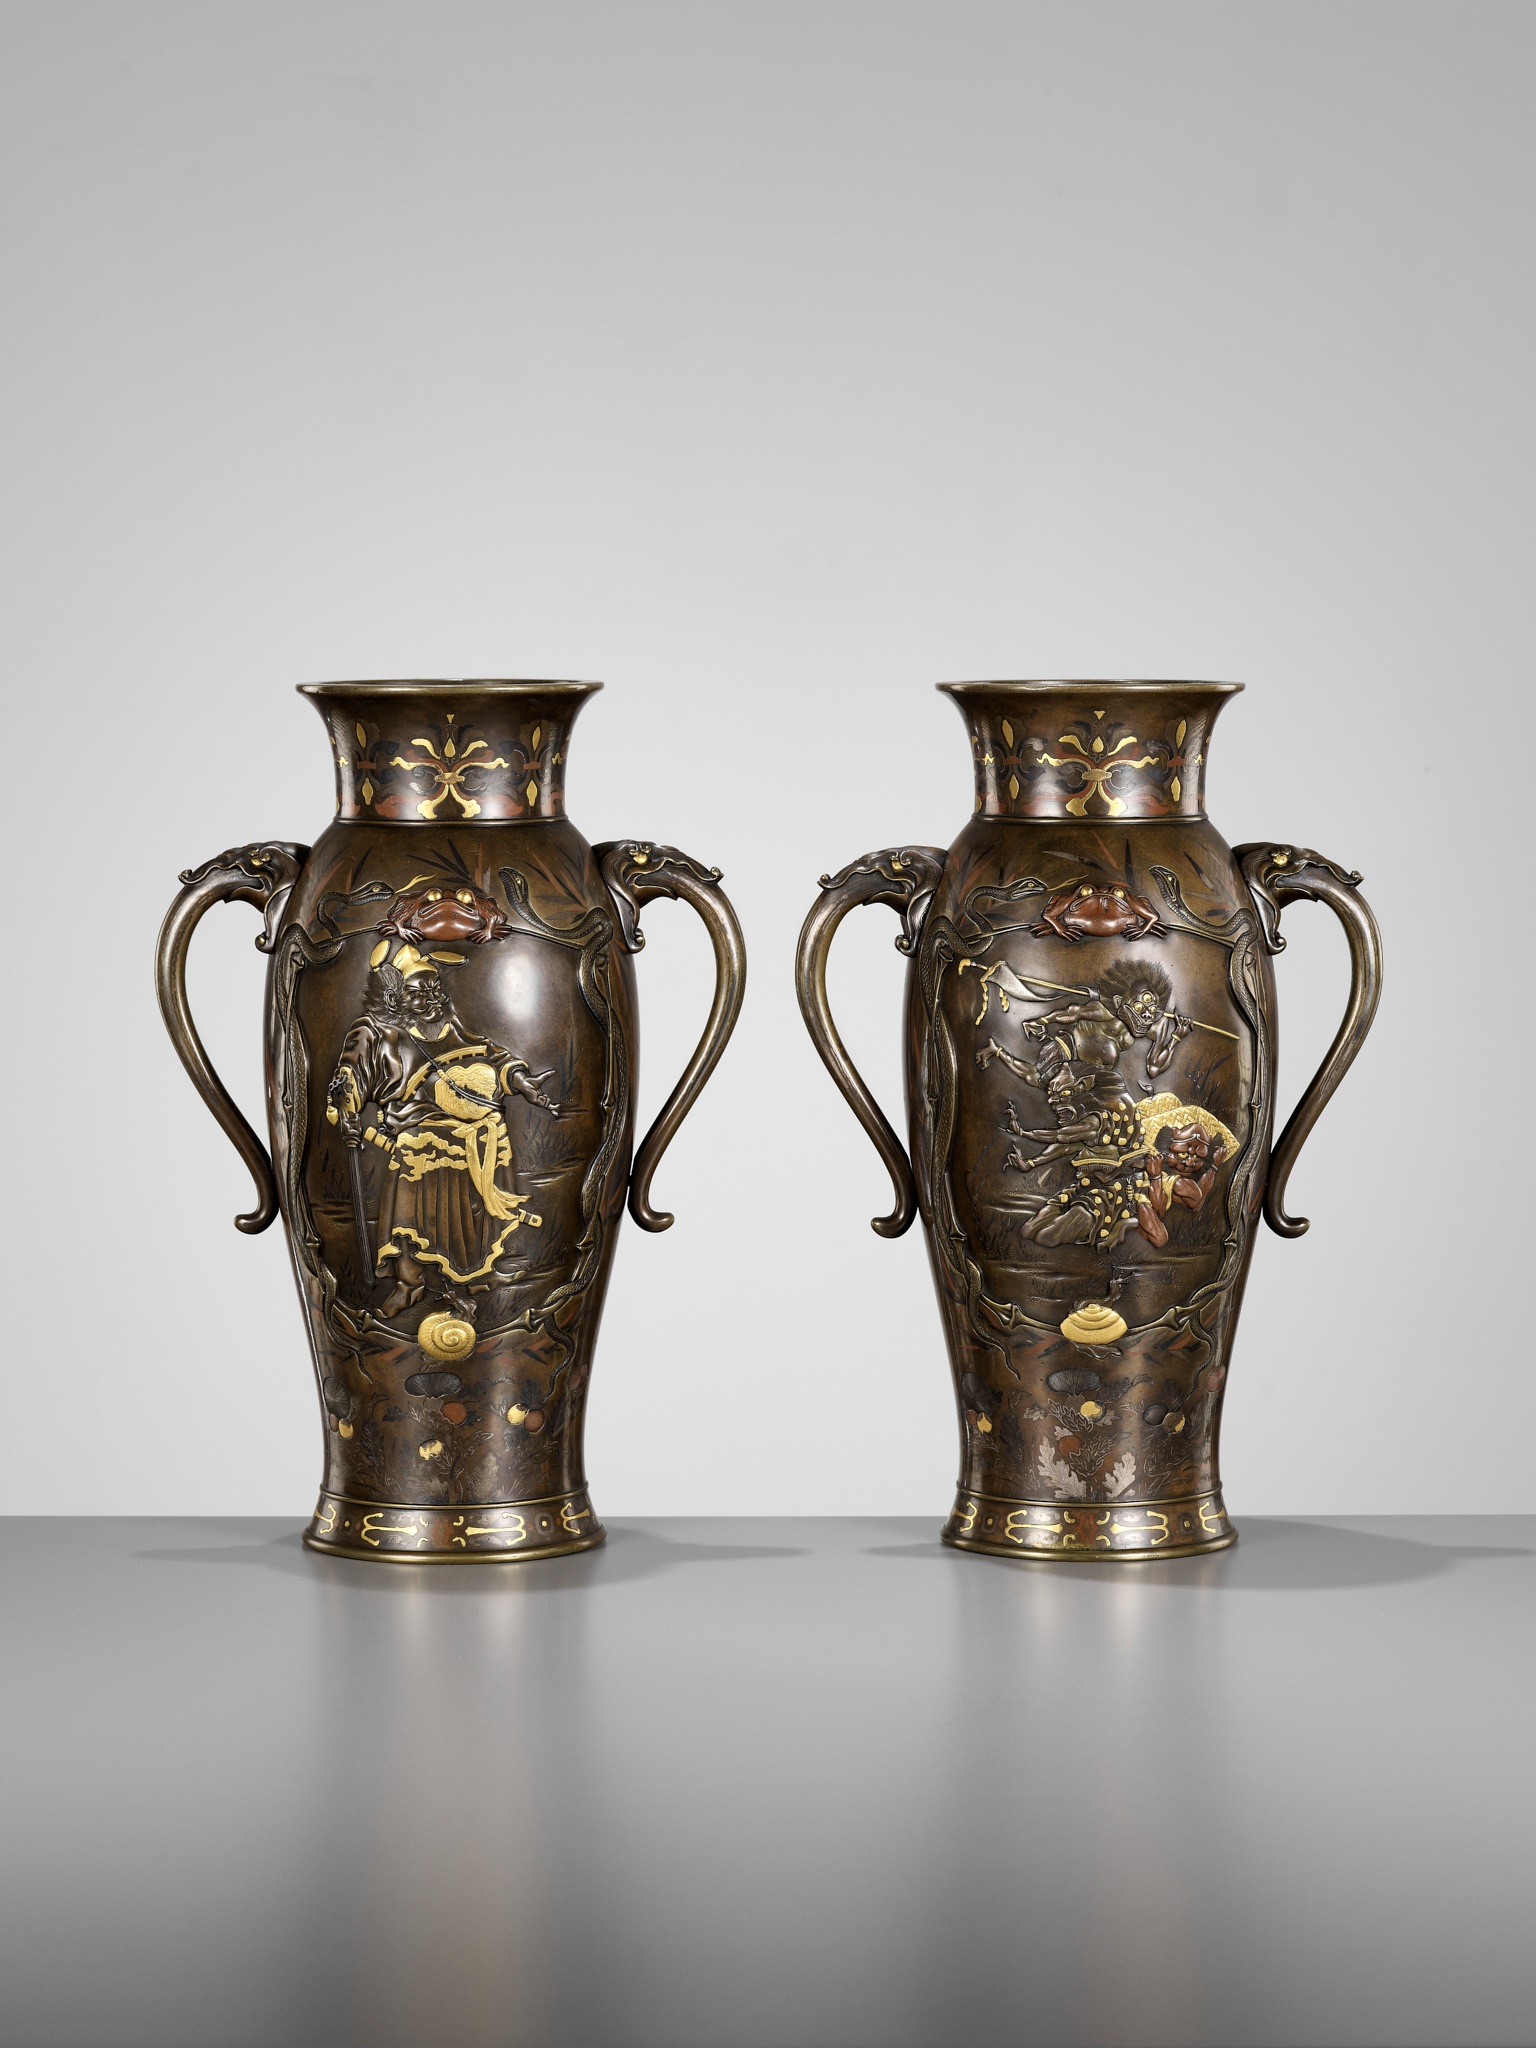 A SUPERB PAIR OF MIYAO-STYLE MIXED-METAL-INLAID AND PARCEL-GILT BRONZE VASES WITH SHOKI AND ONI - Image 5 of 15